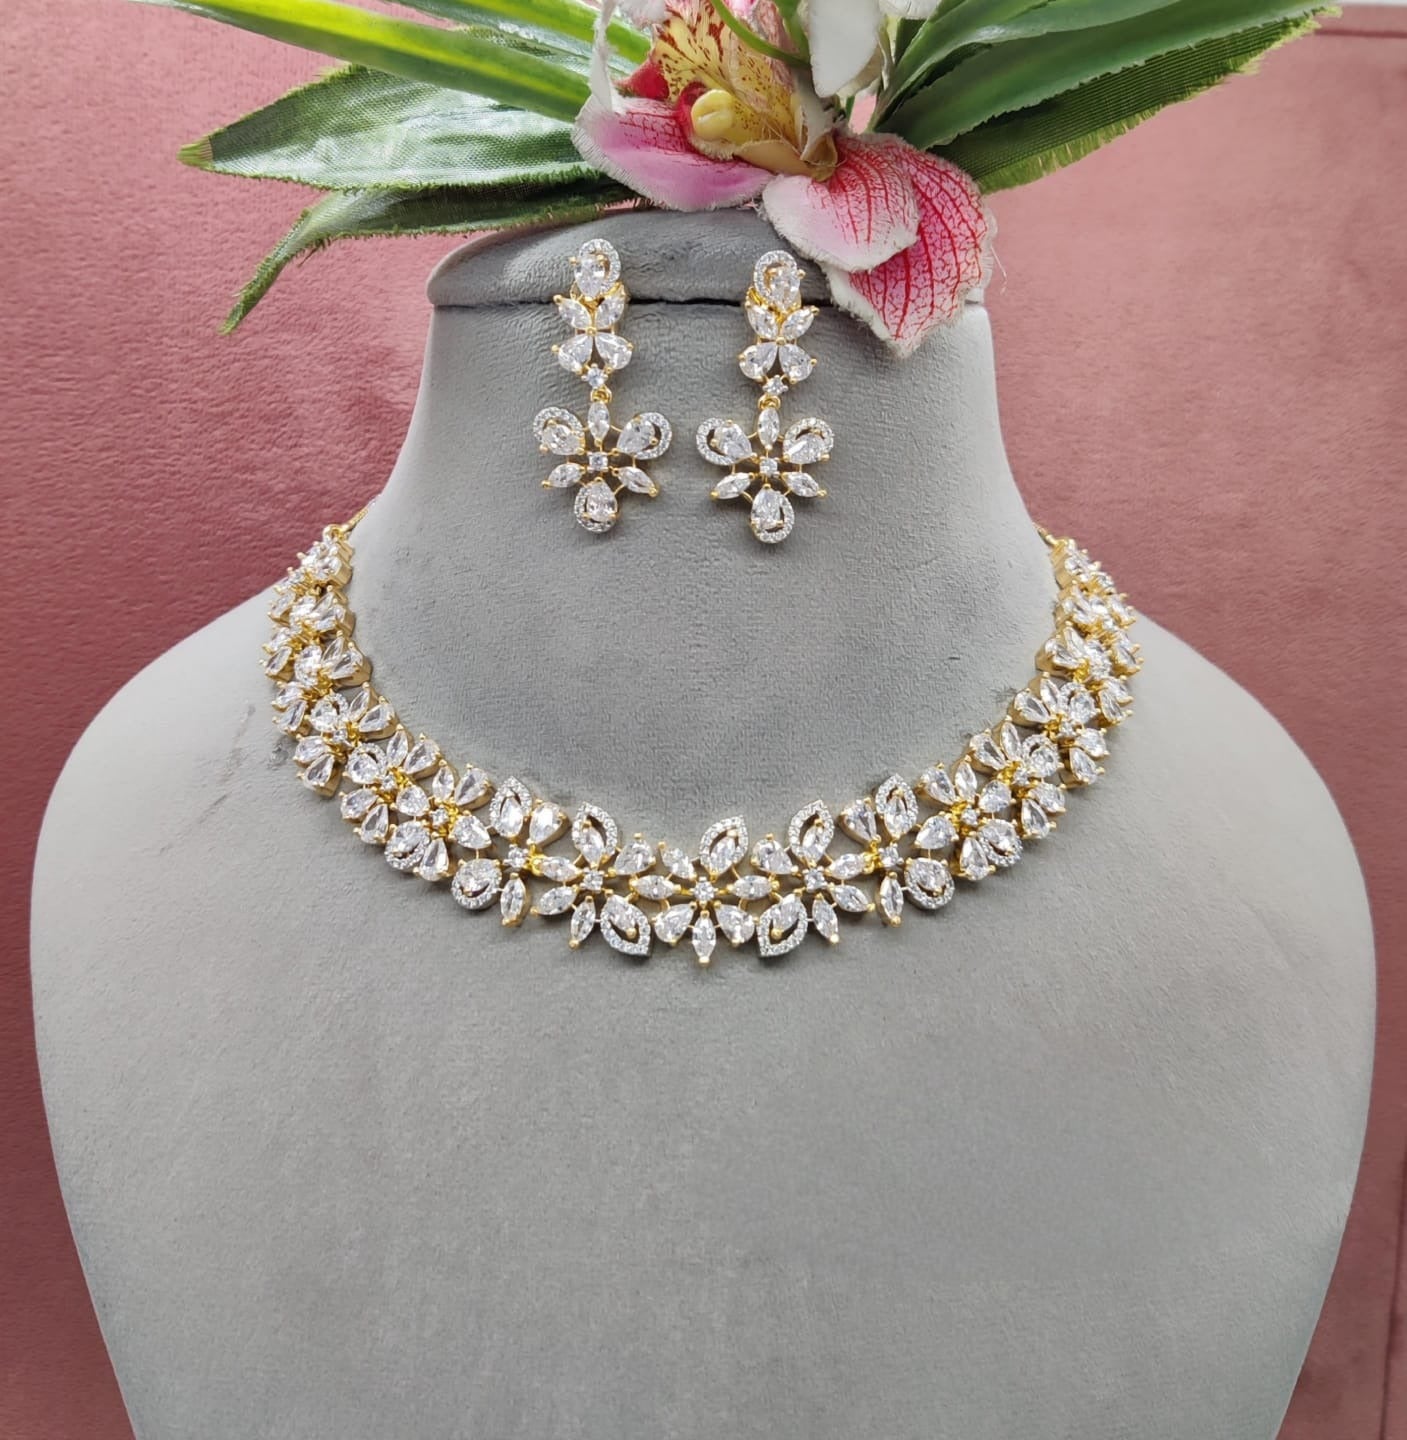 High-Quality American Diamond Necklace Set with Exquisite Flower Pattern and Matching Earrings for Timeless Glamour